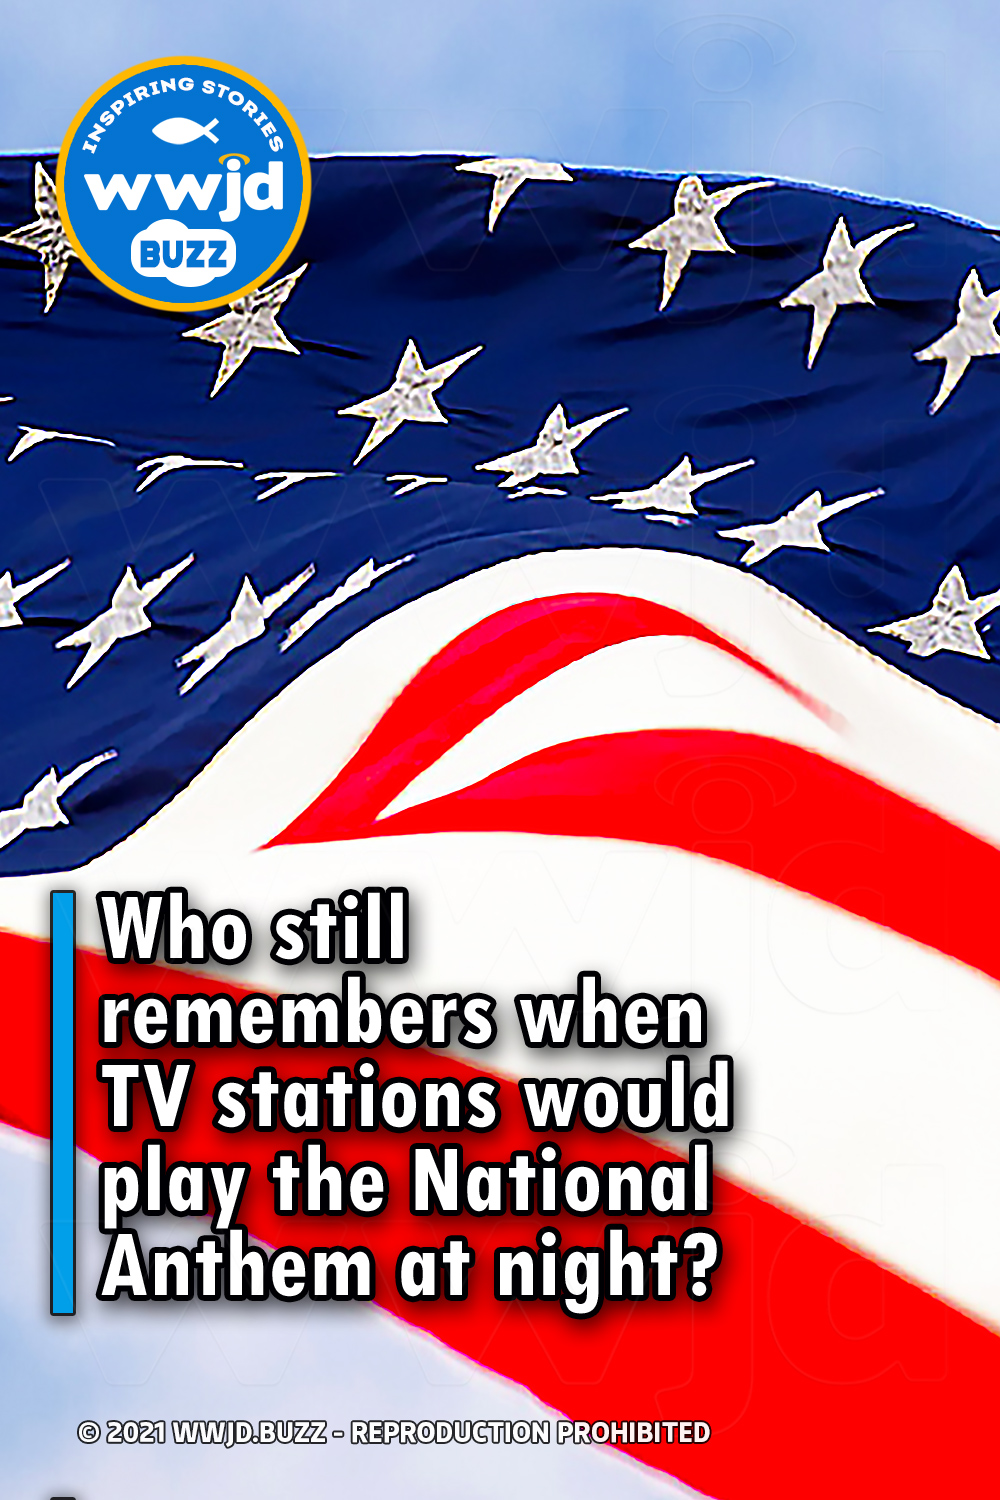 Who still remembers when TV stations would play the National Anthem at night?